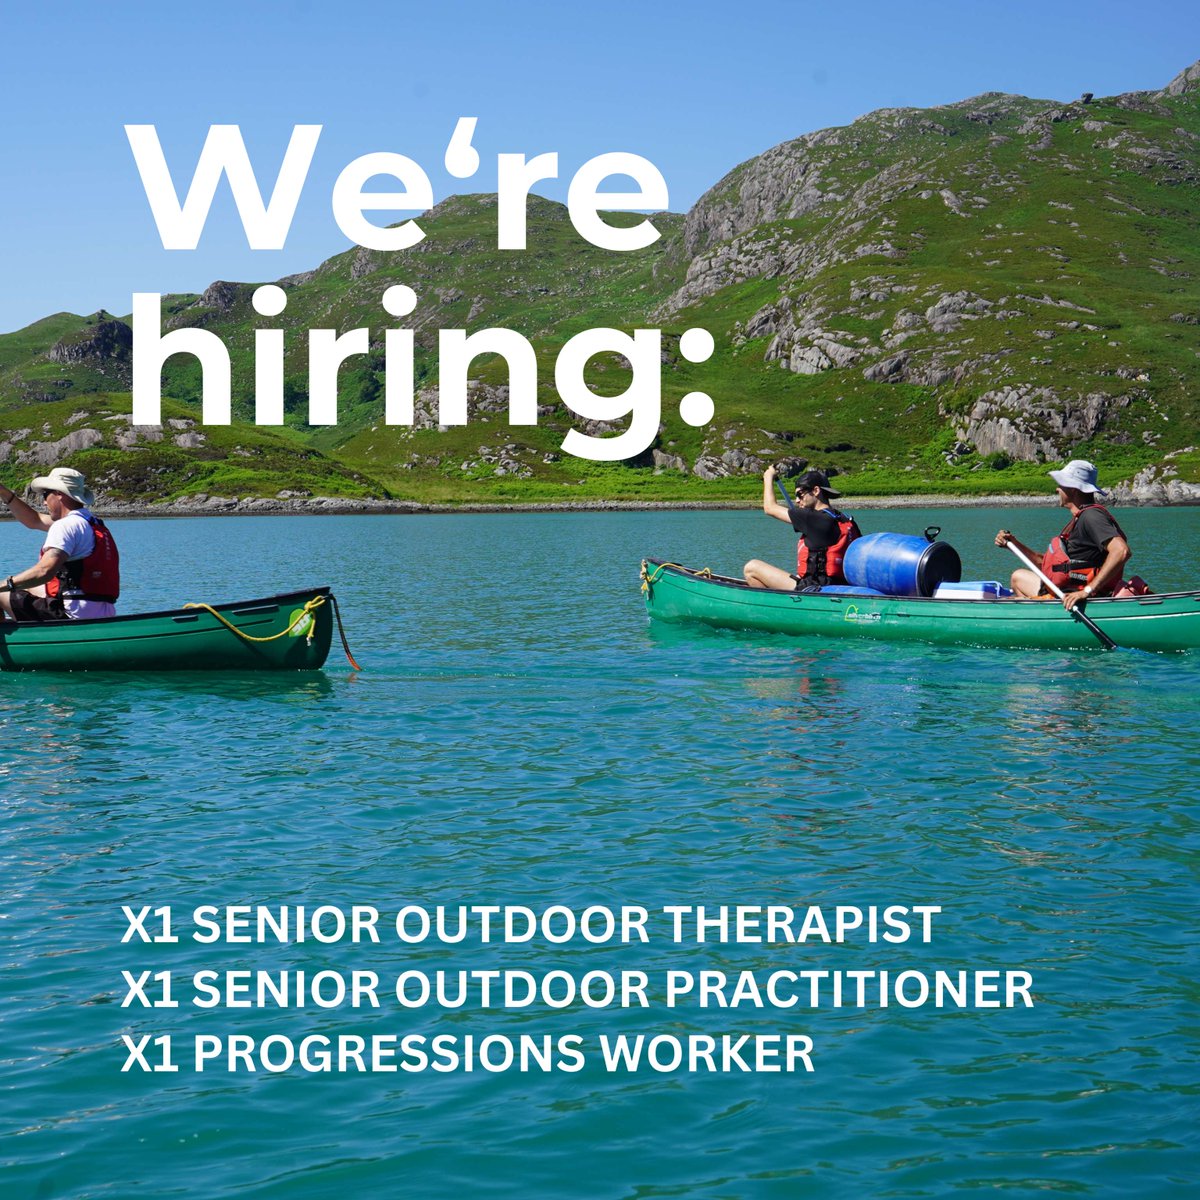 🌱We're growing!  Venture Trust is now recruiting for three exciting new roles:

↟ Senior Outdoor Practitioner
↟ Senior Outdoor Therapist
↟ Progressions worker 

Learn more and apply bit.ly/3KBgYll

#WorkWithPurpose #Hiring #ThirdsectorJobs